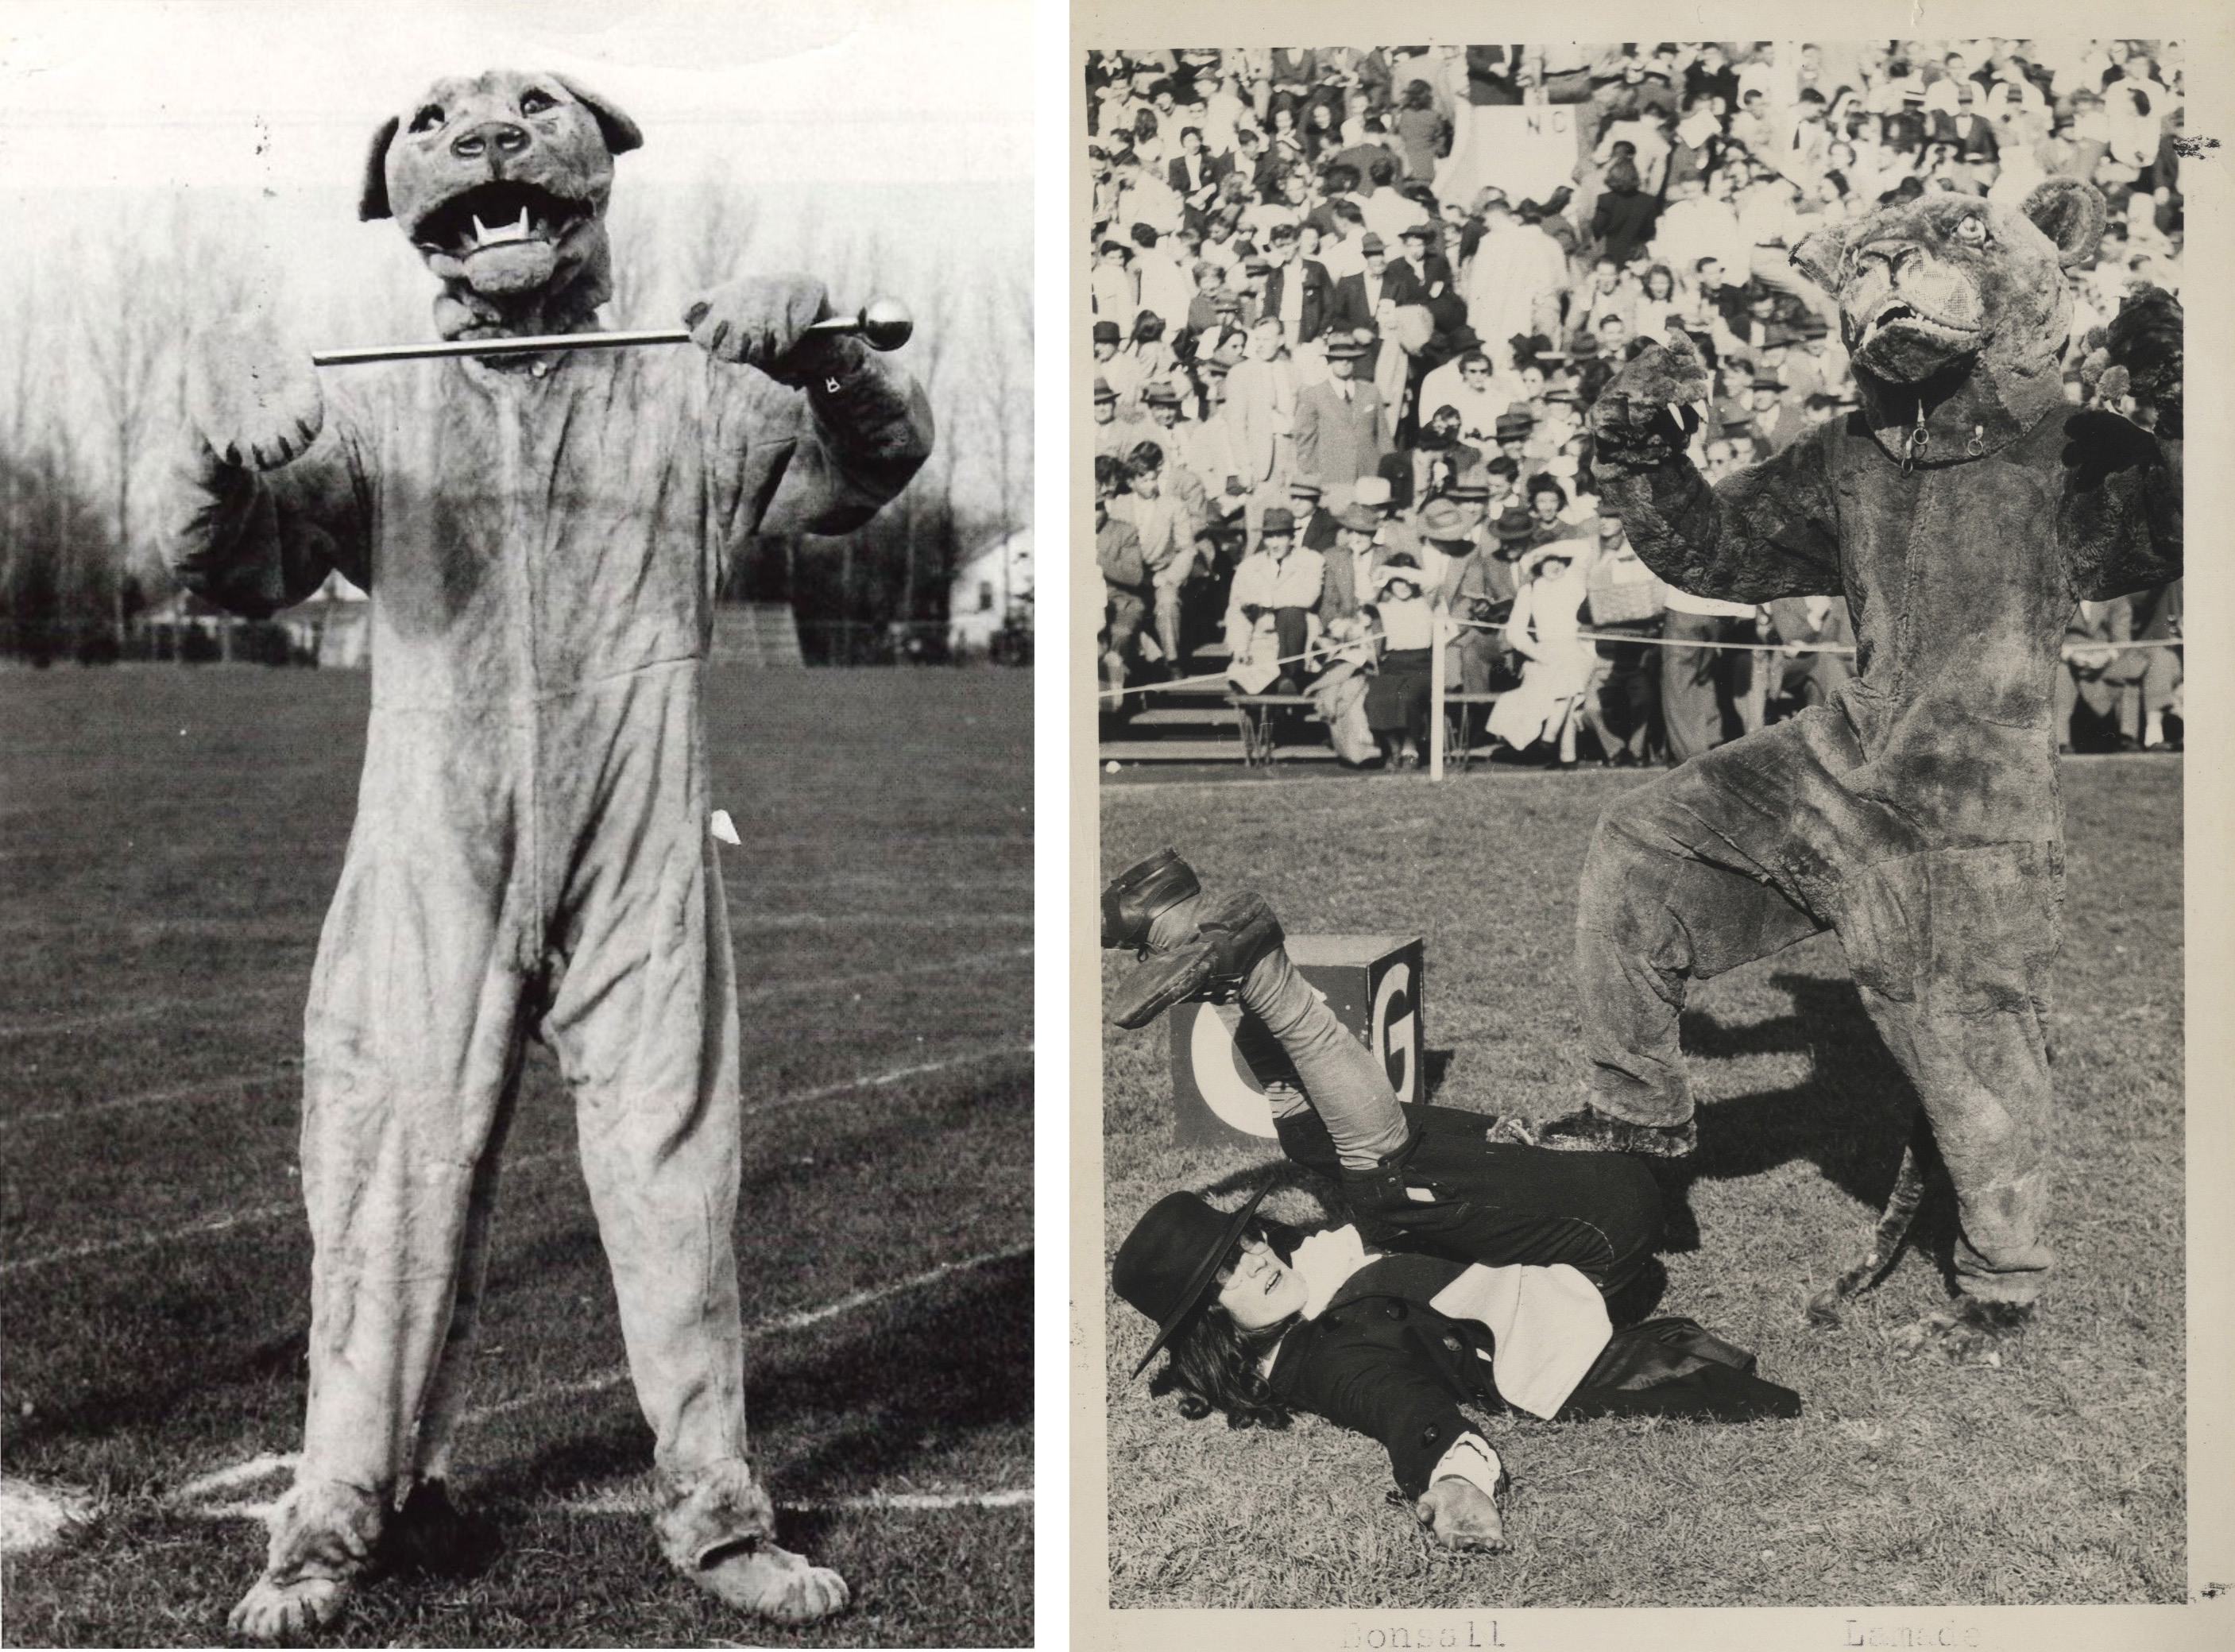 side by side black and white photos of the Nittany Lion's antics on the football field in the 1940s